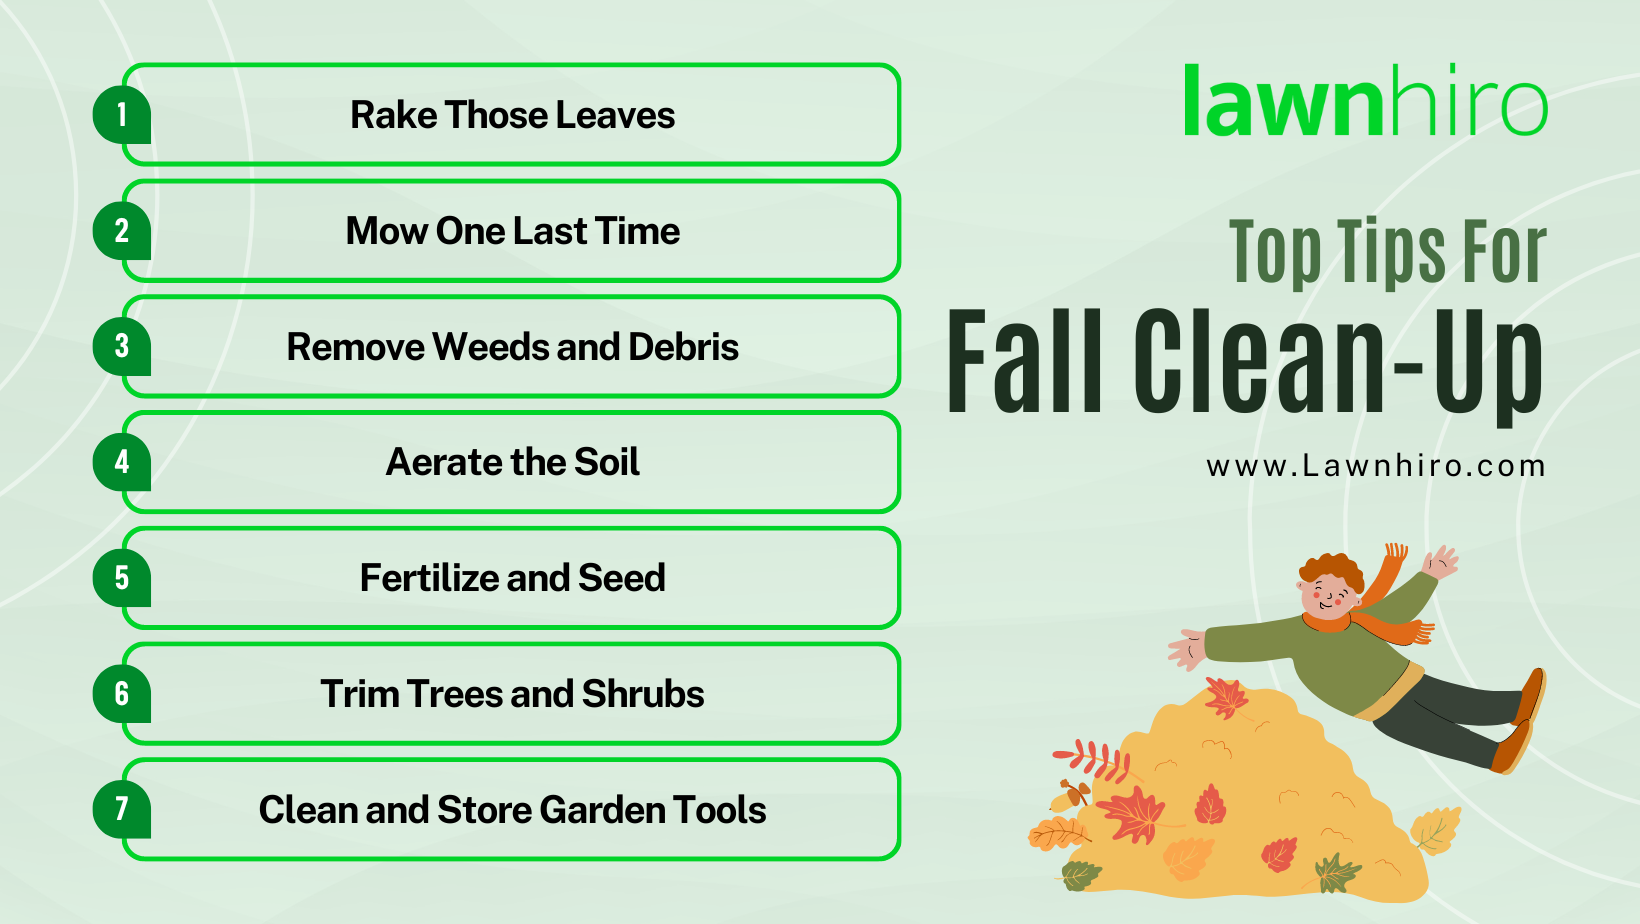 Tips for Fall Clean-Up - Lawnhiro Blog